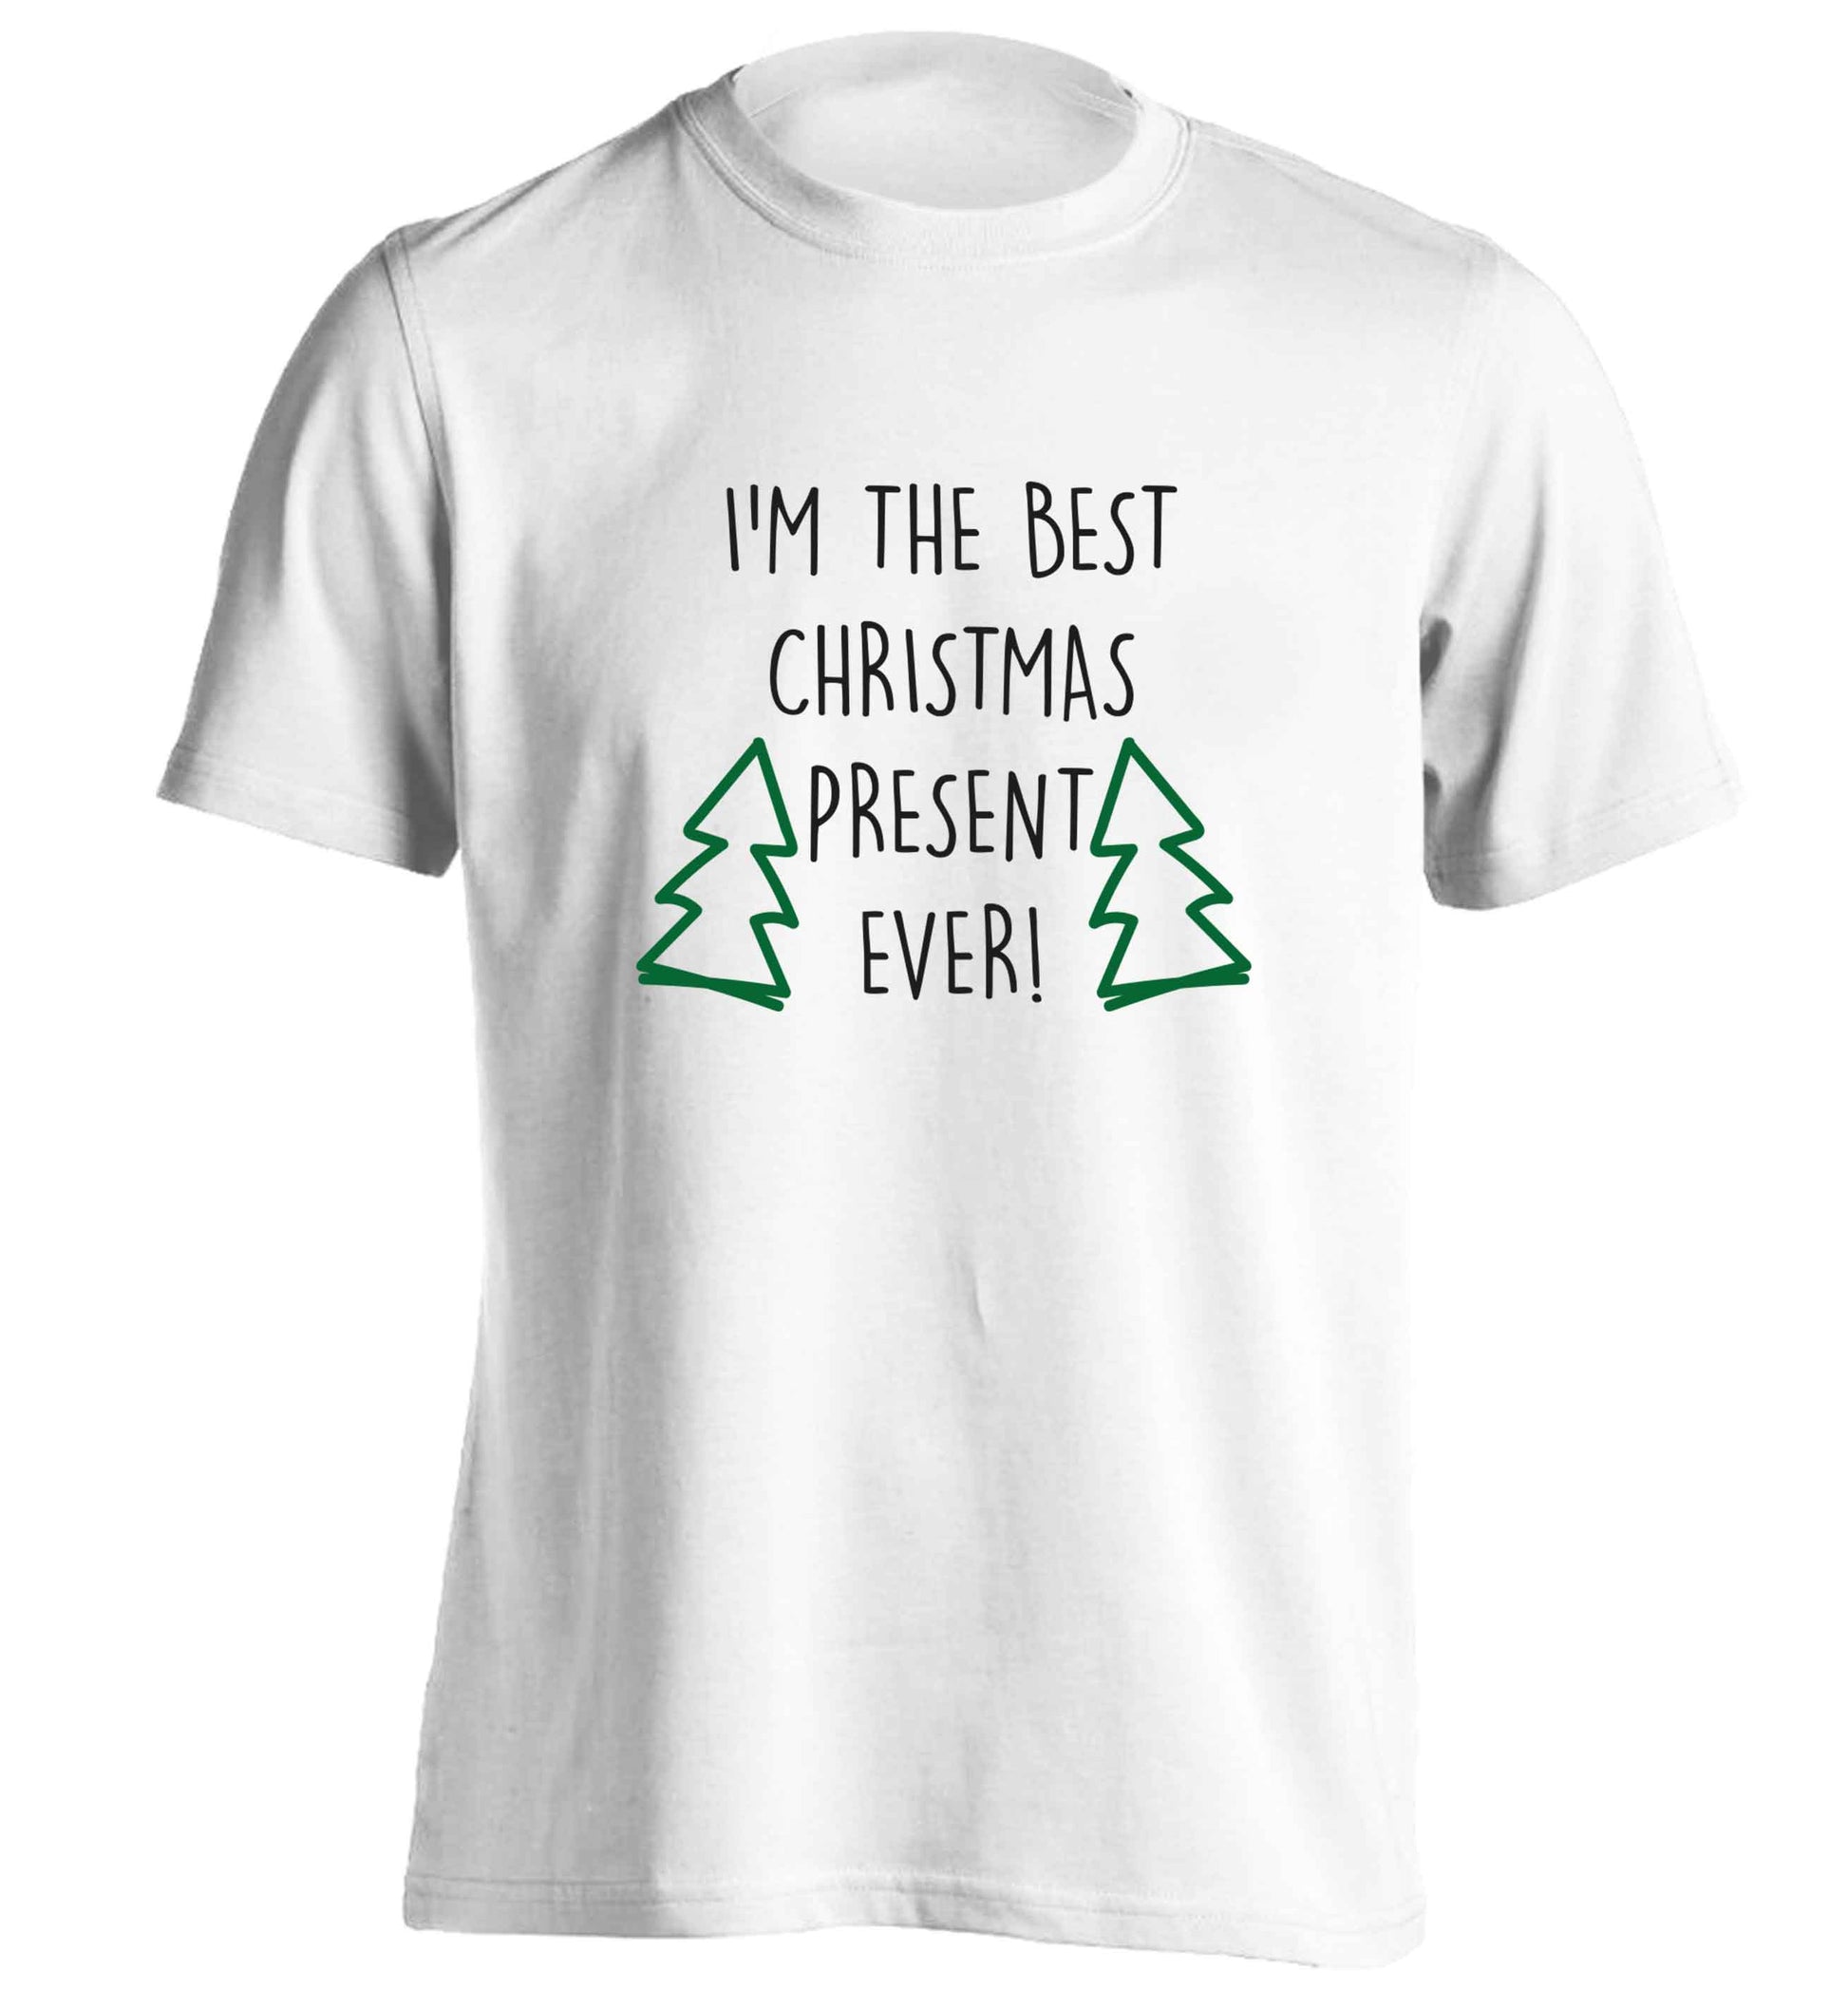 I'm the best Christmas present ever adults unisex white Tshirt 2XL